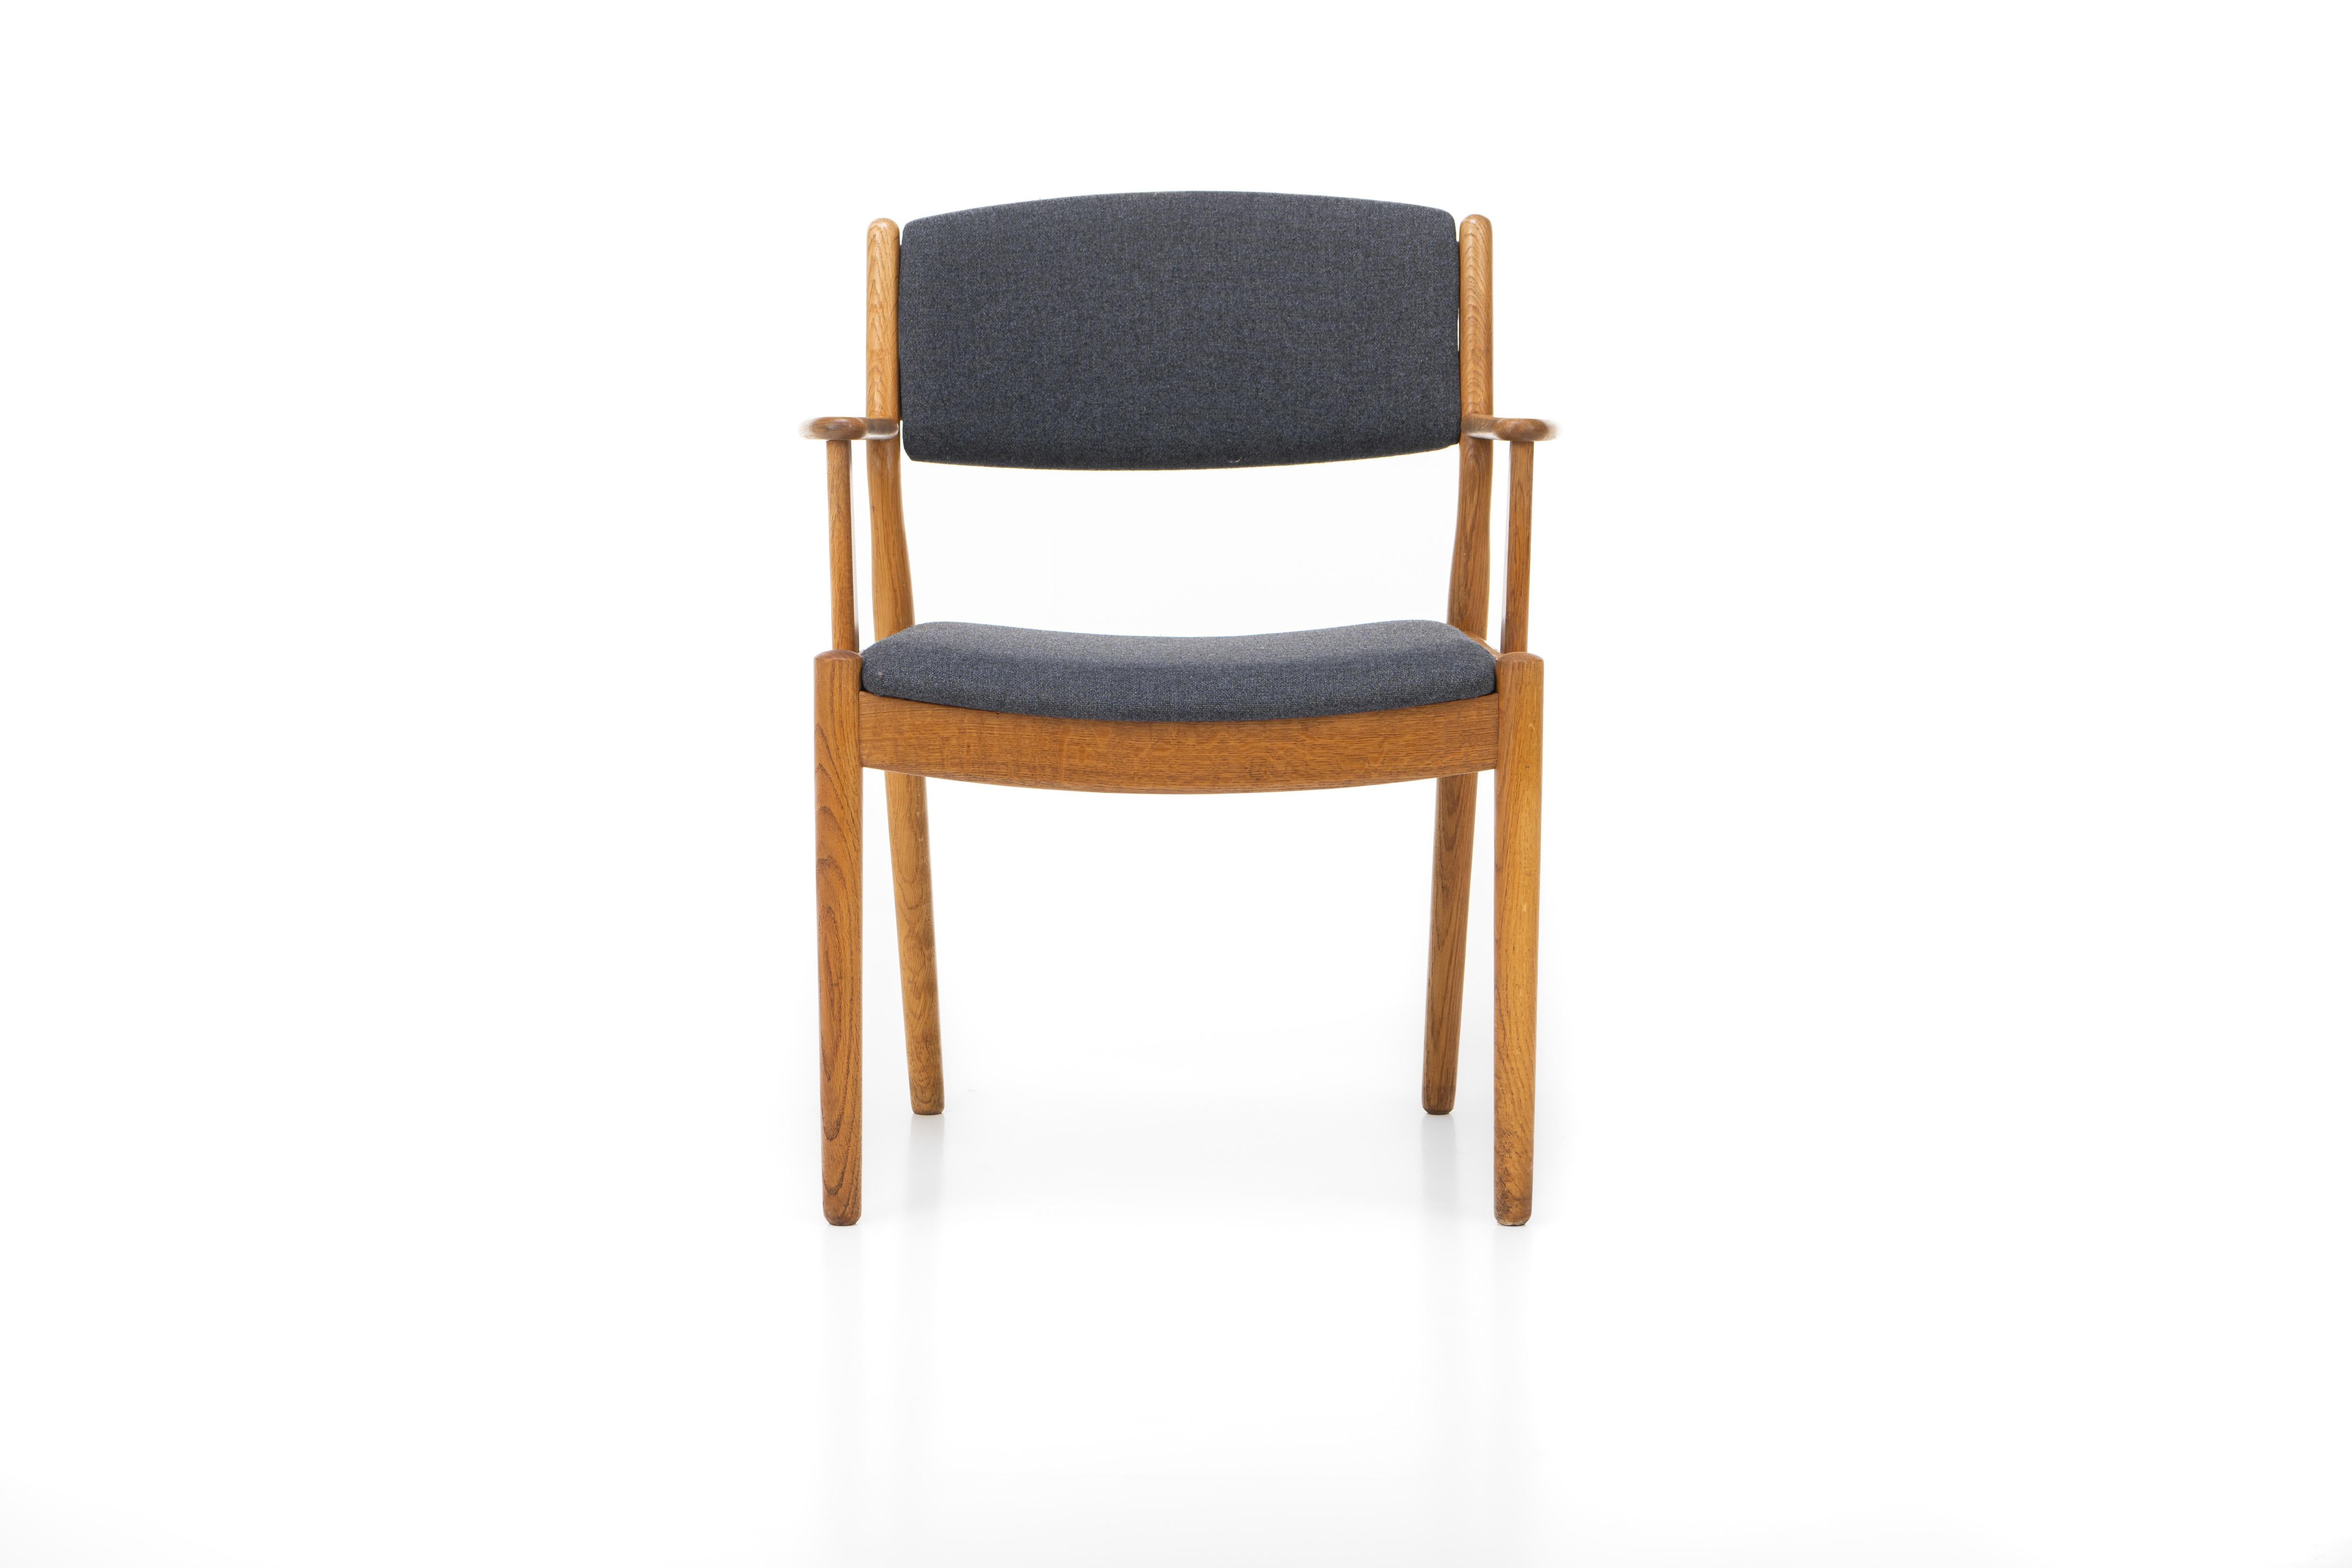 Danish Dining Chairs with Armrests by Poul Volther for FDB Møbler, Denmark, 1960 For Sale 3